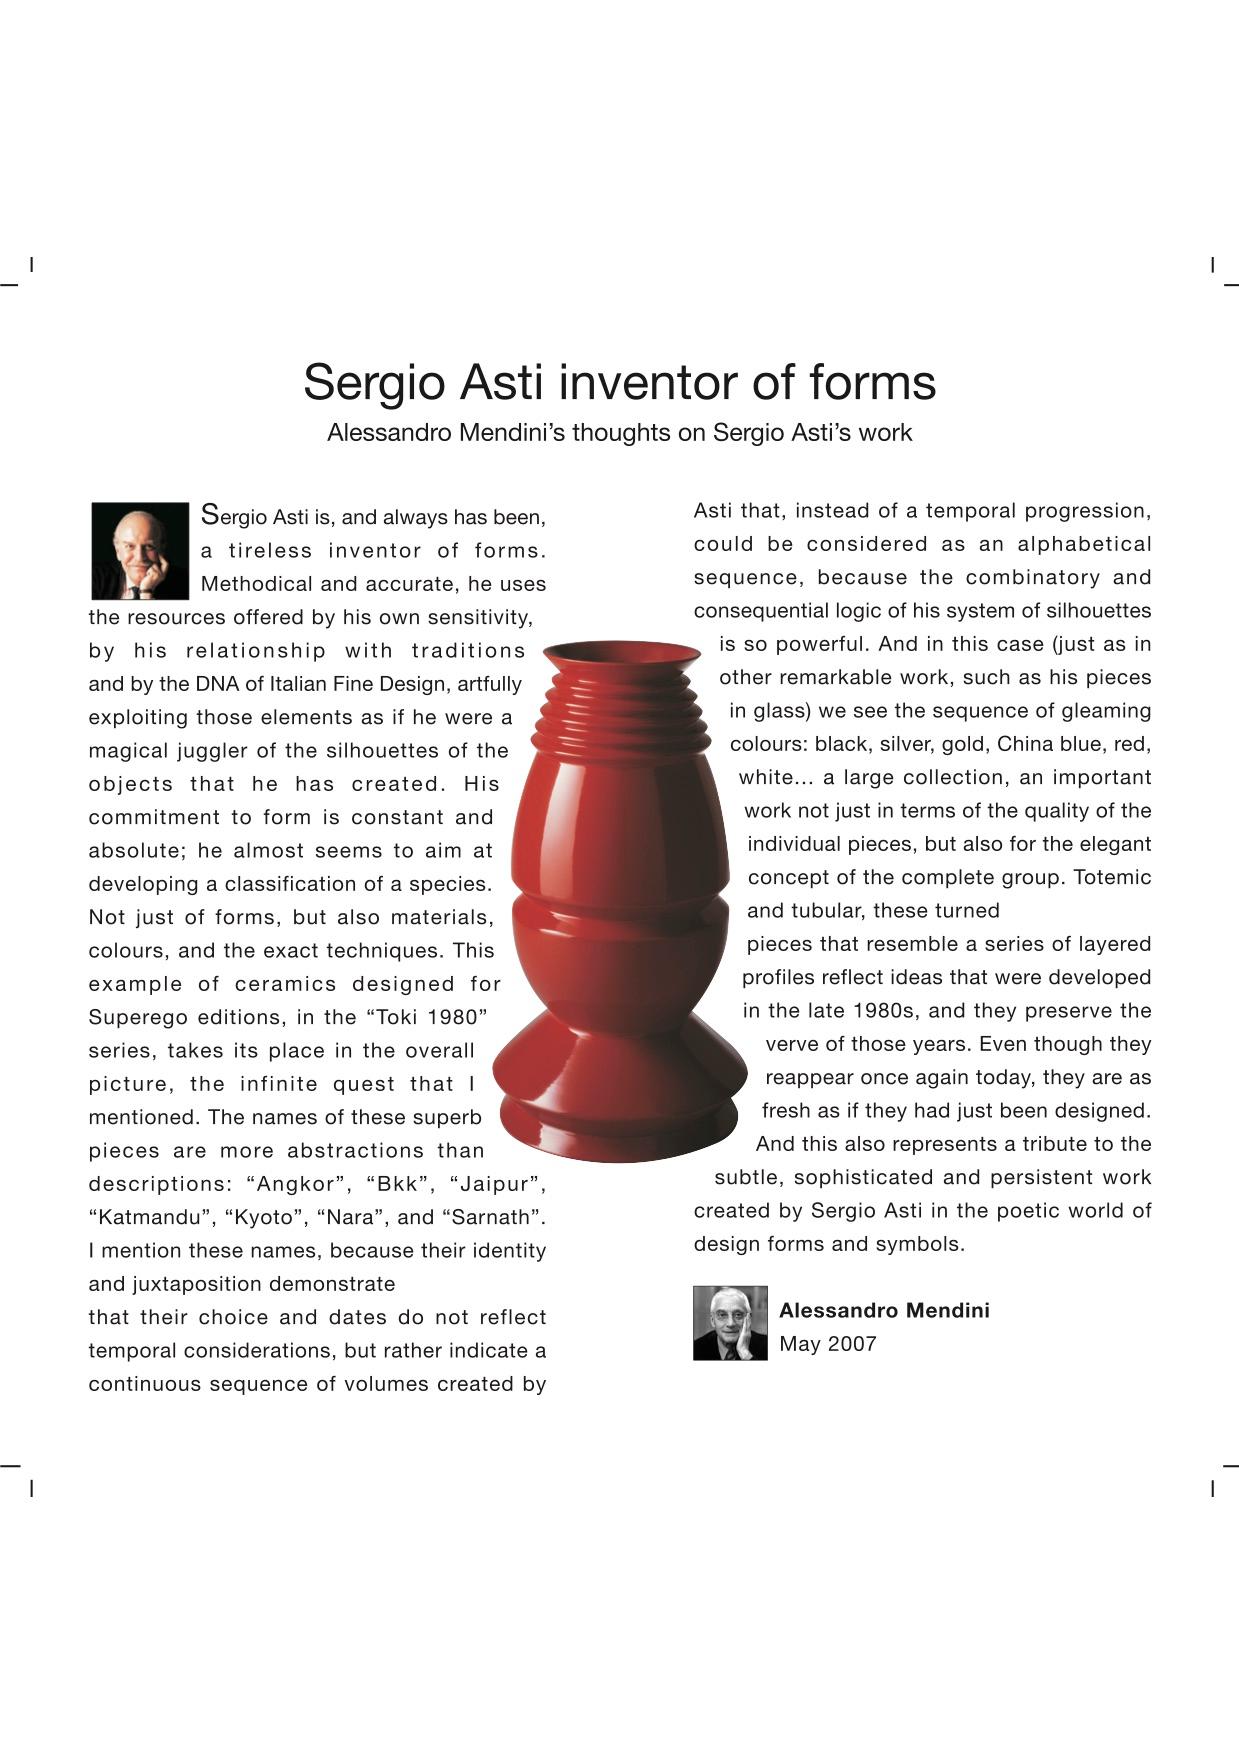 Ceramic Vase Jaipur Model by Sergio Asti for Superego Editions For Sale 1